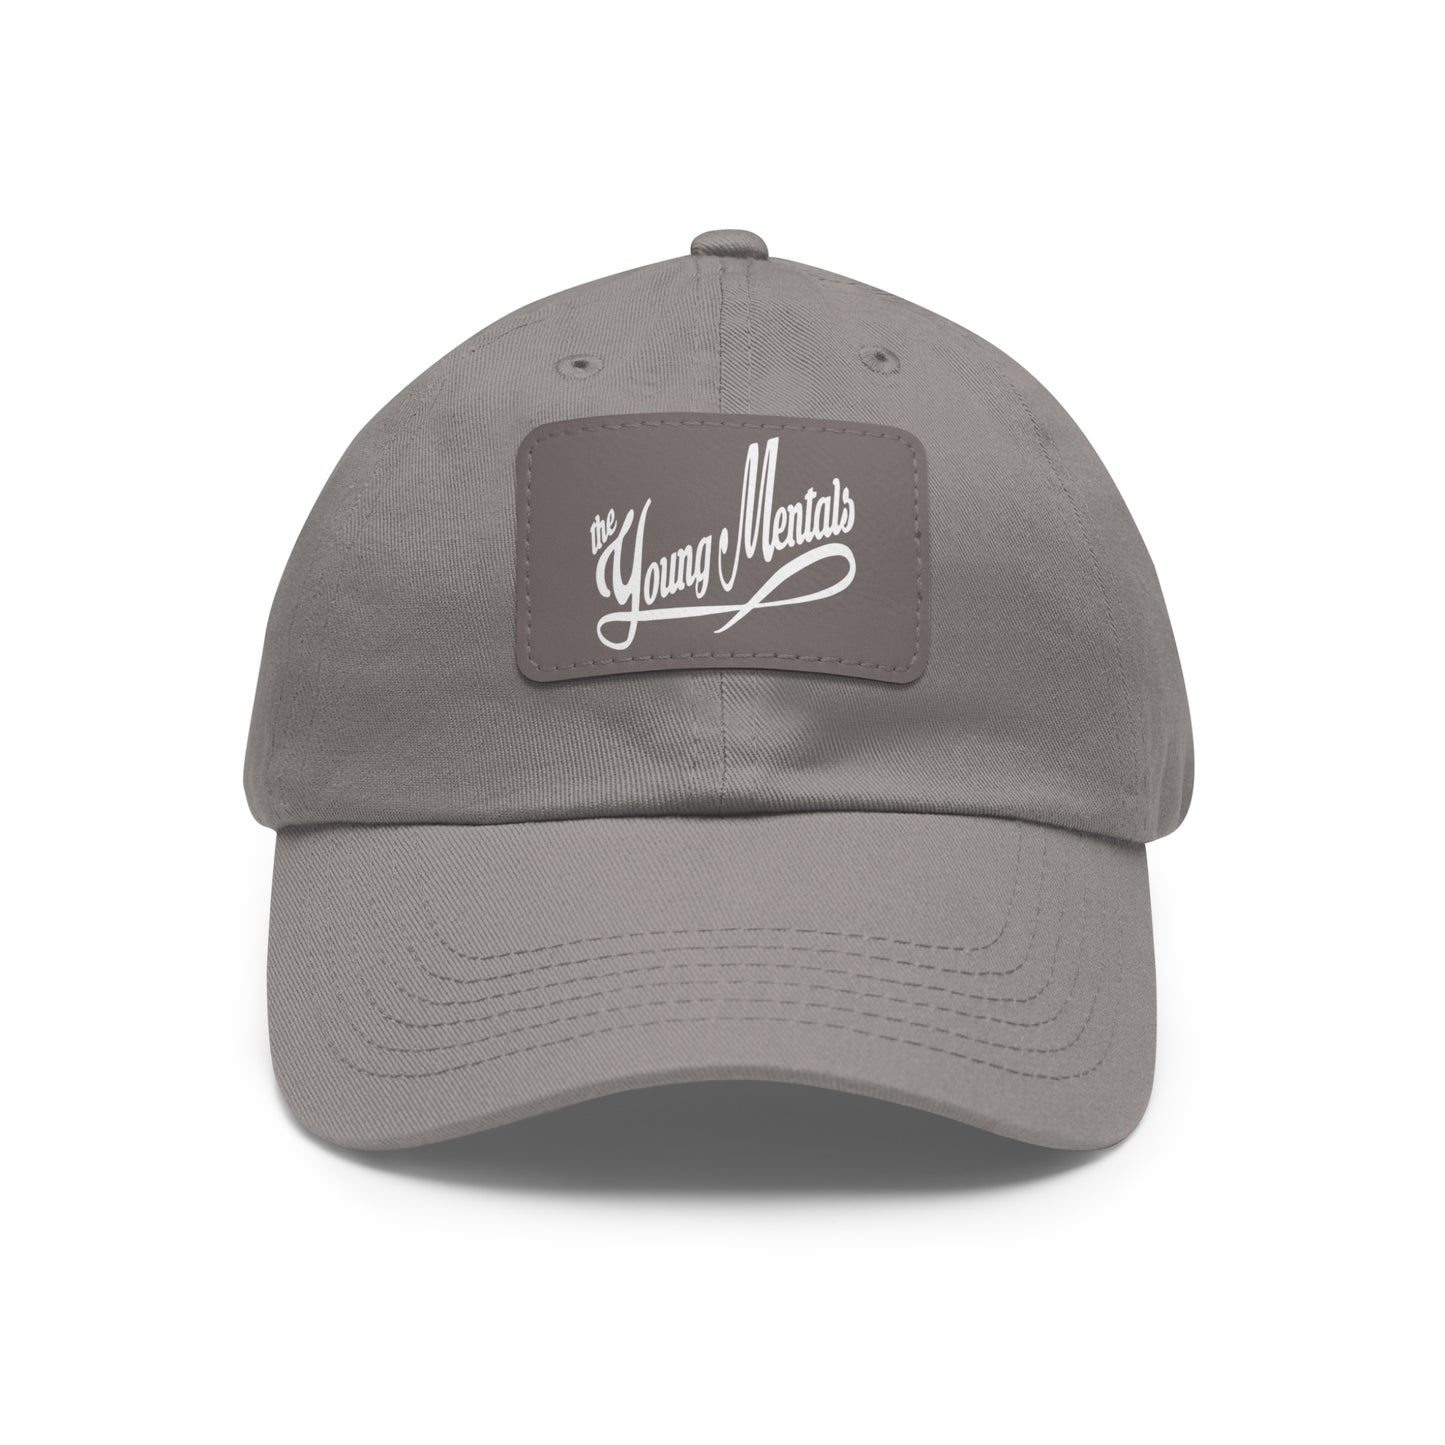 The Young Mentals Dad Hat w/ Leather Patch